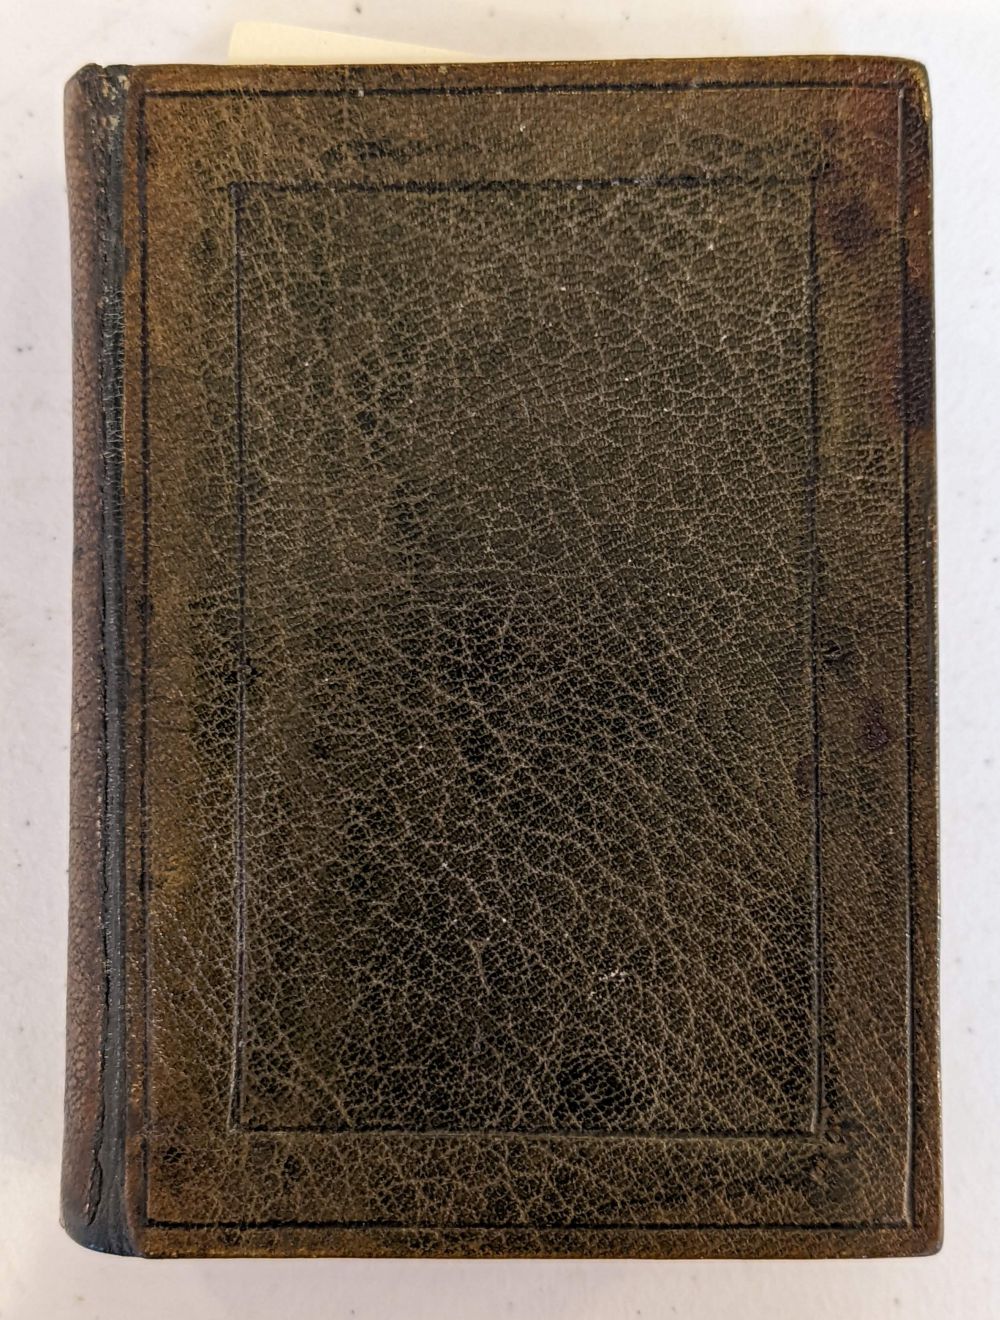 Embroidered binding. The Holy Bible, Oxford University Press, circa 1895 - Image 2 of 17